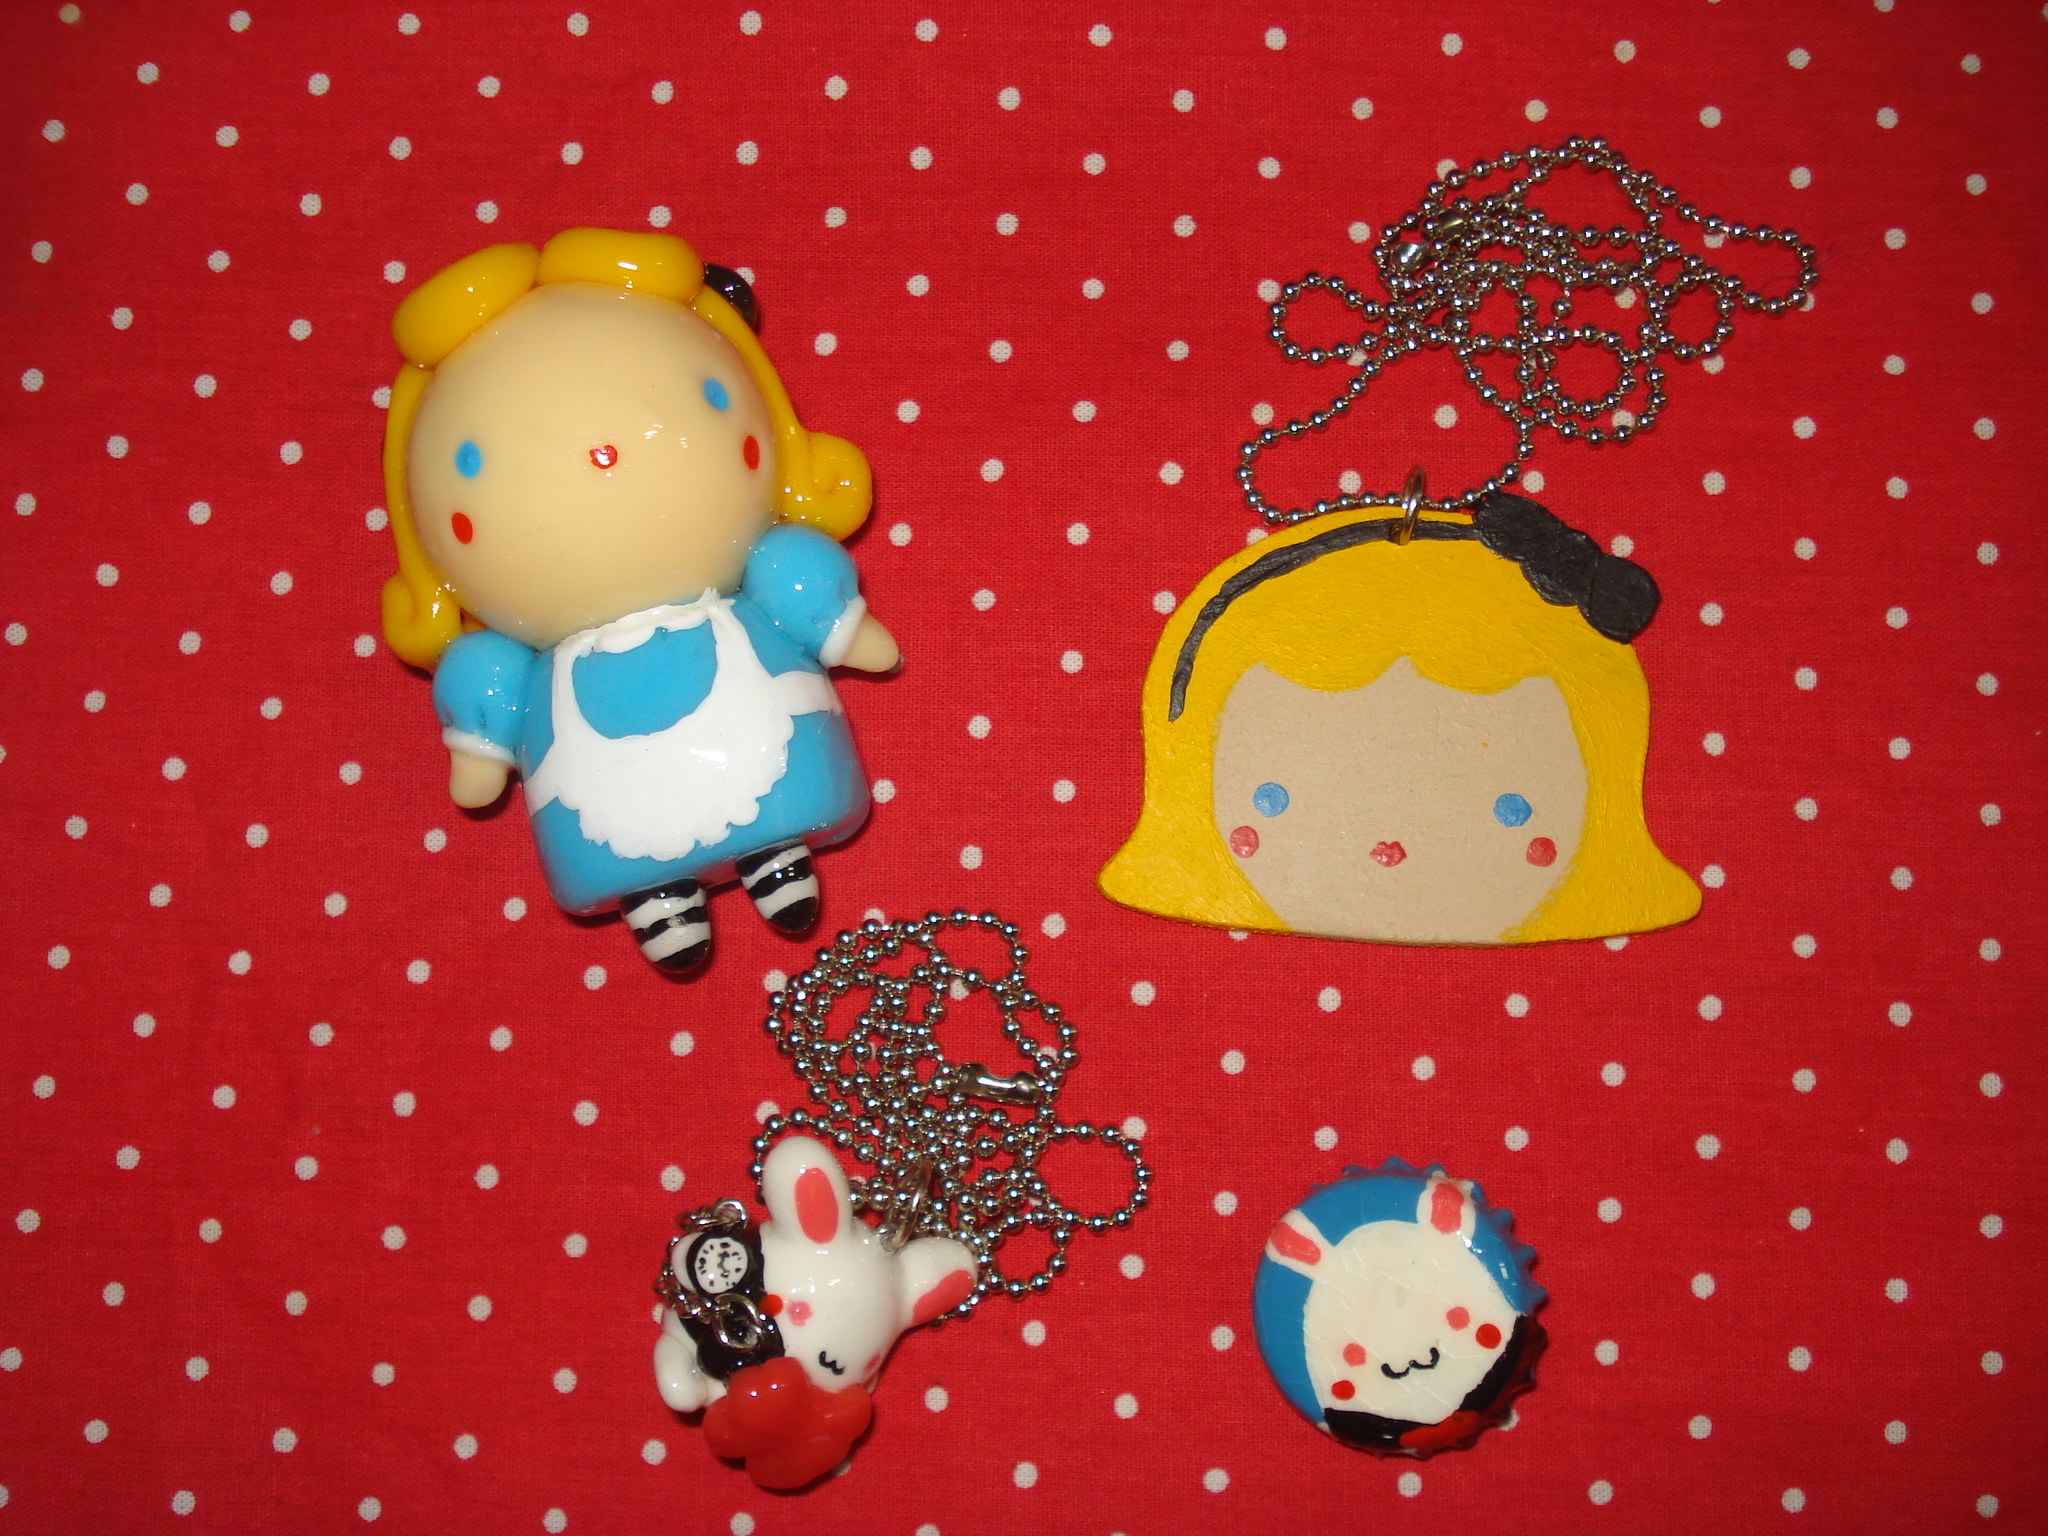 small doll figurines hanging from necklaces on a table